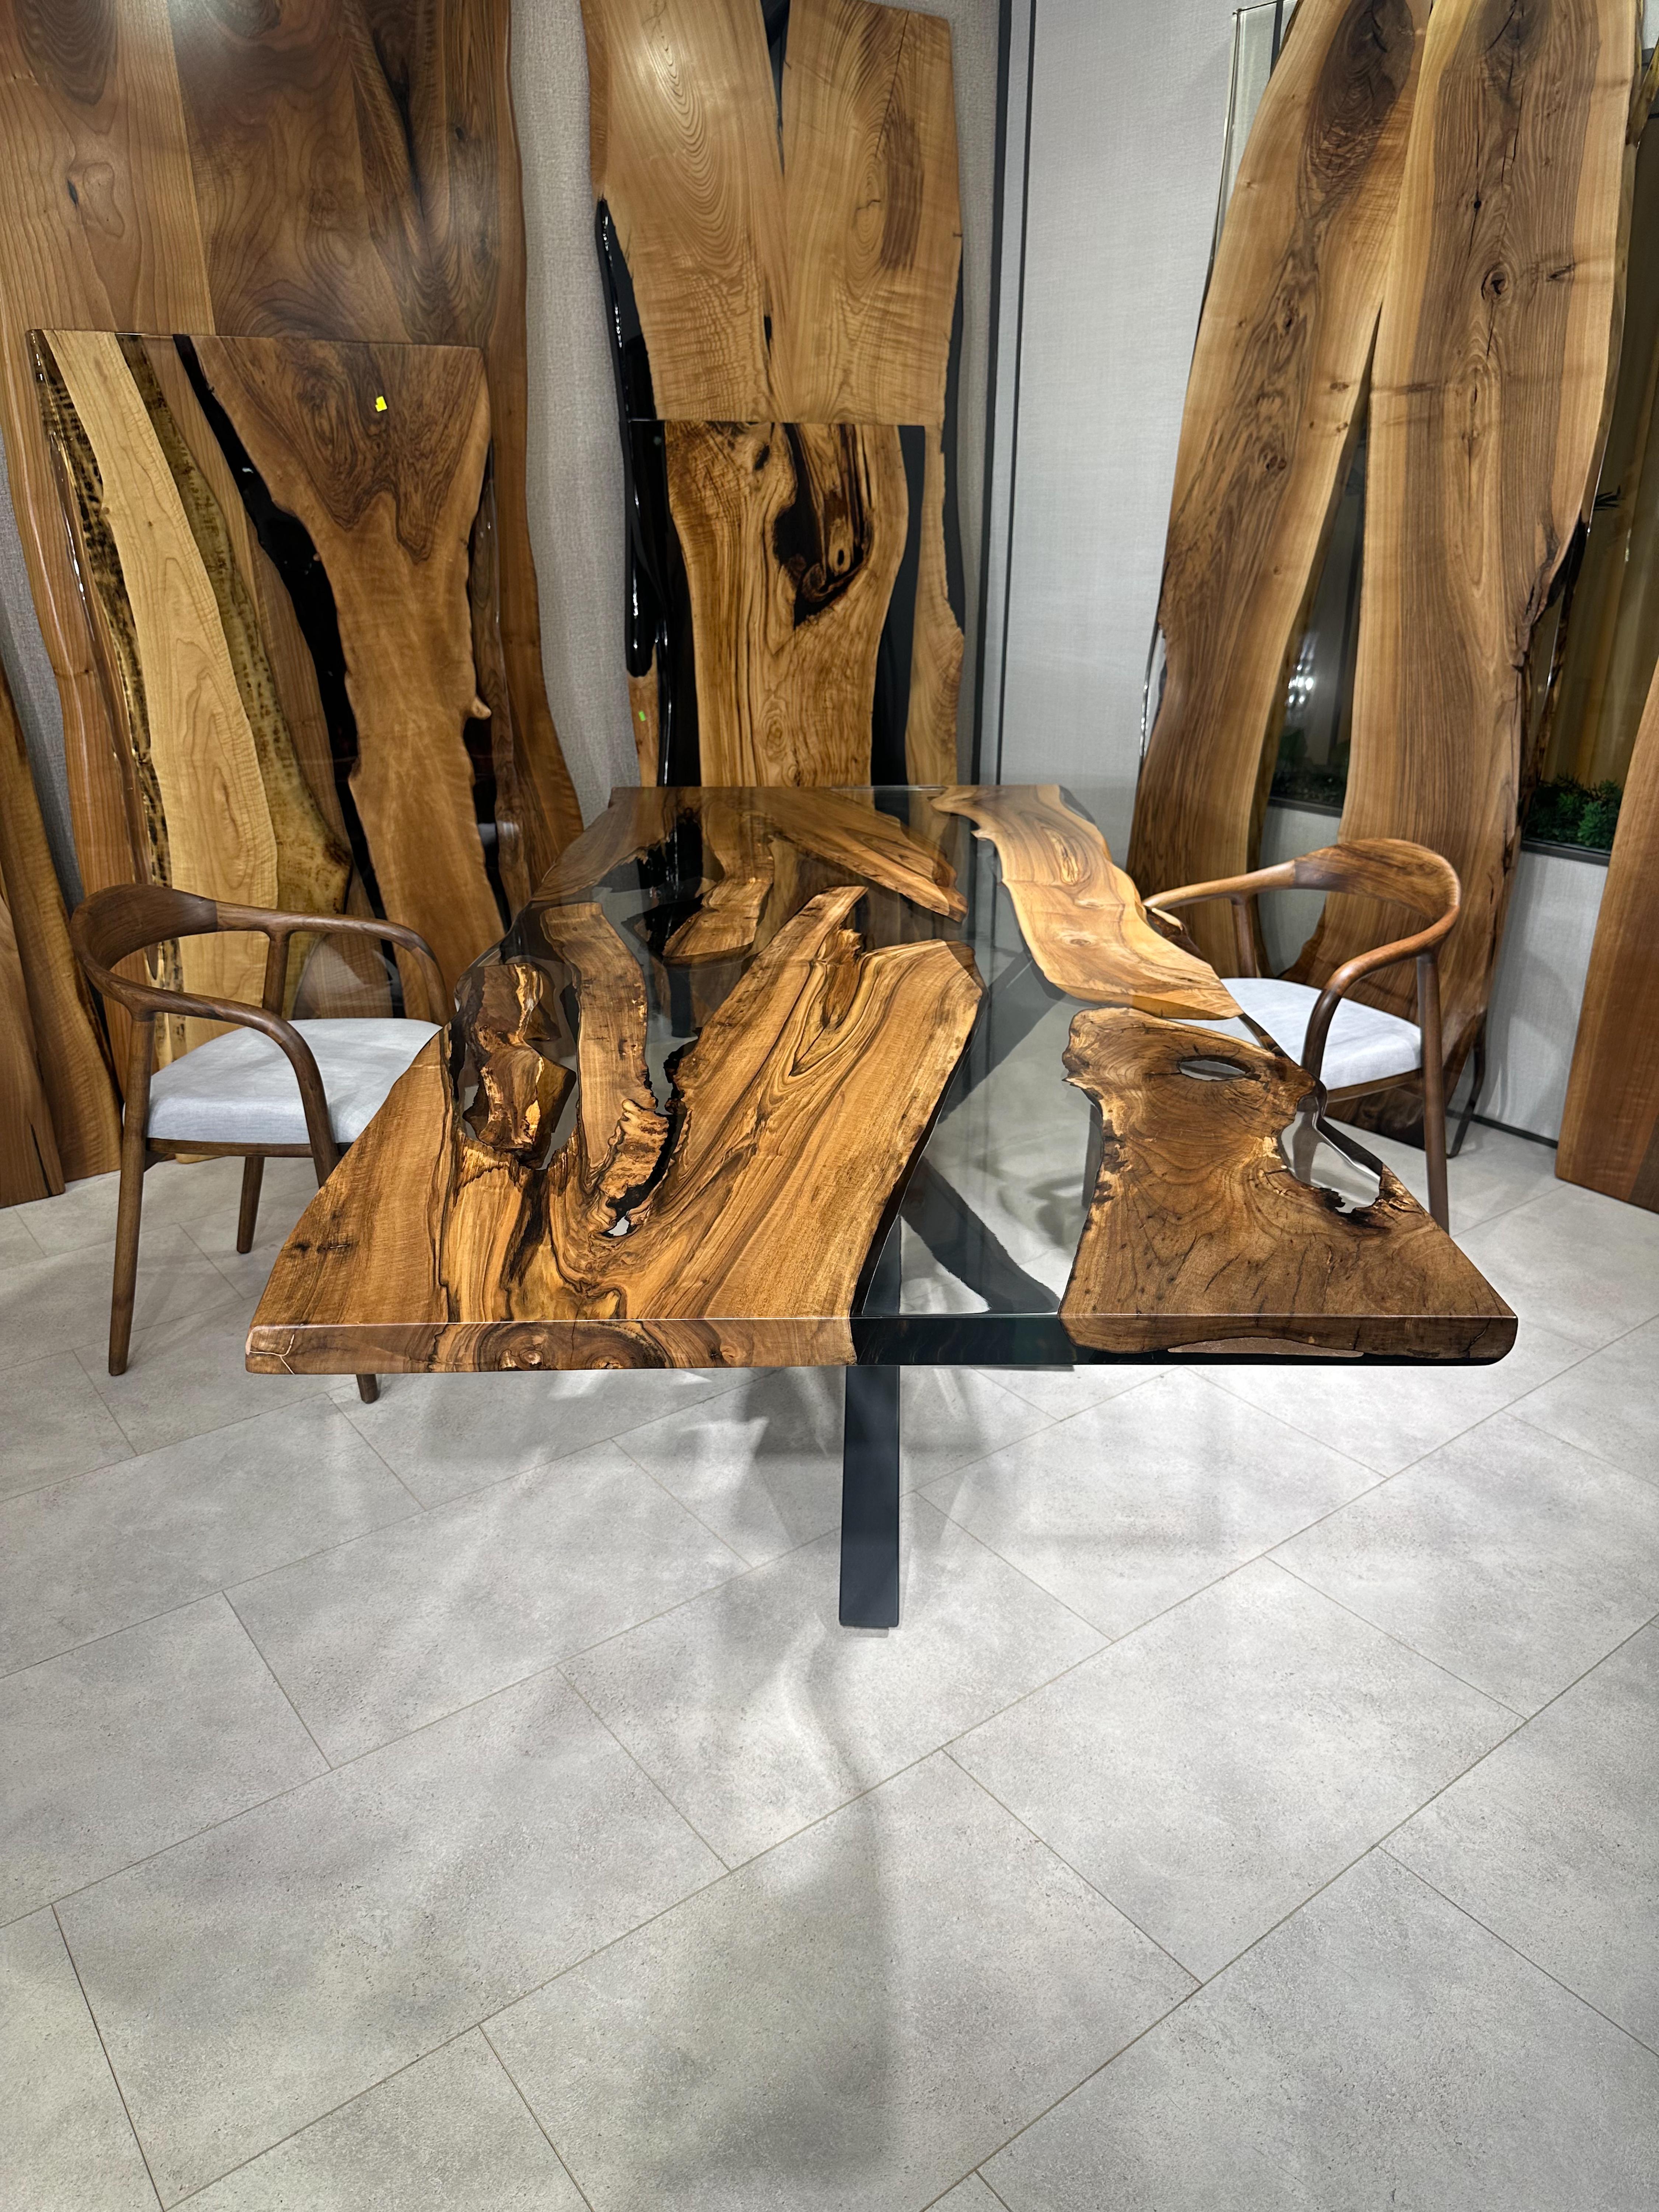 Walnut Live Edge Custom Clear Epoxy Resin Round Dining Table 

This table is made of 500 years old walnut wood. The grains and texture of the wood describe what a natural walnut woods looks like.
It can be used as a dining table or as a conference